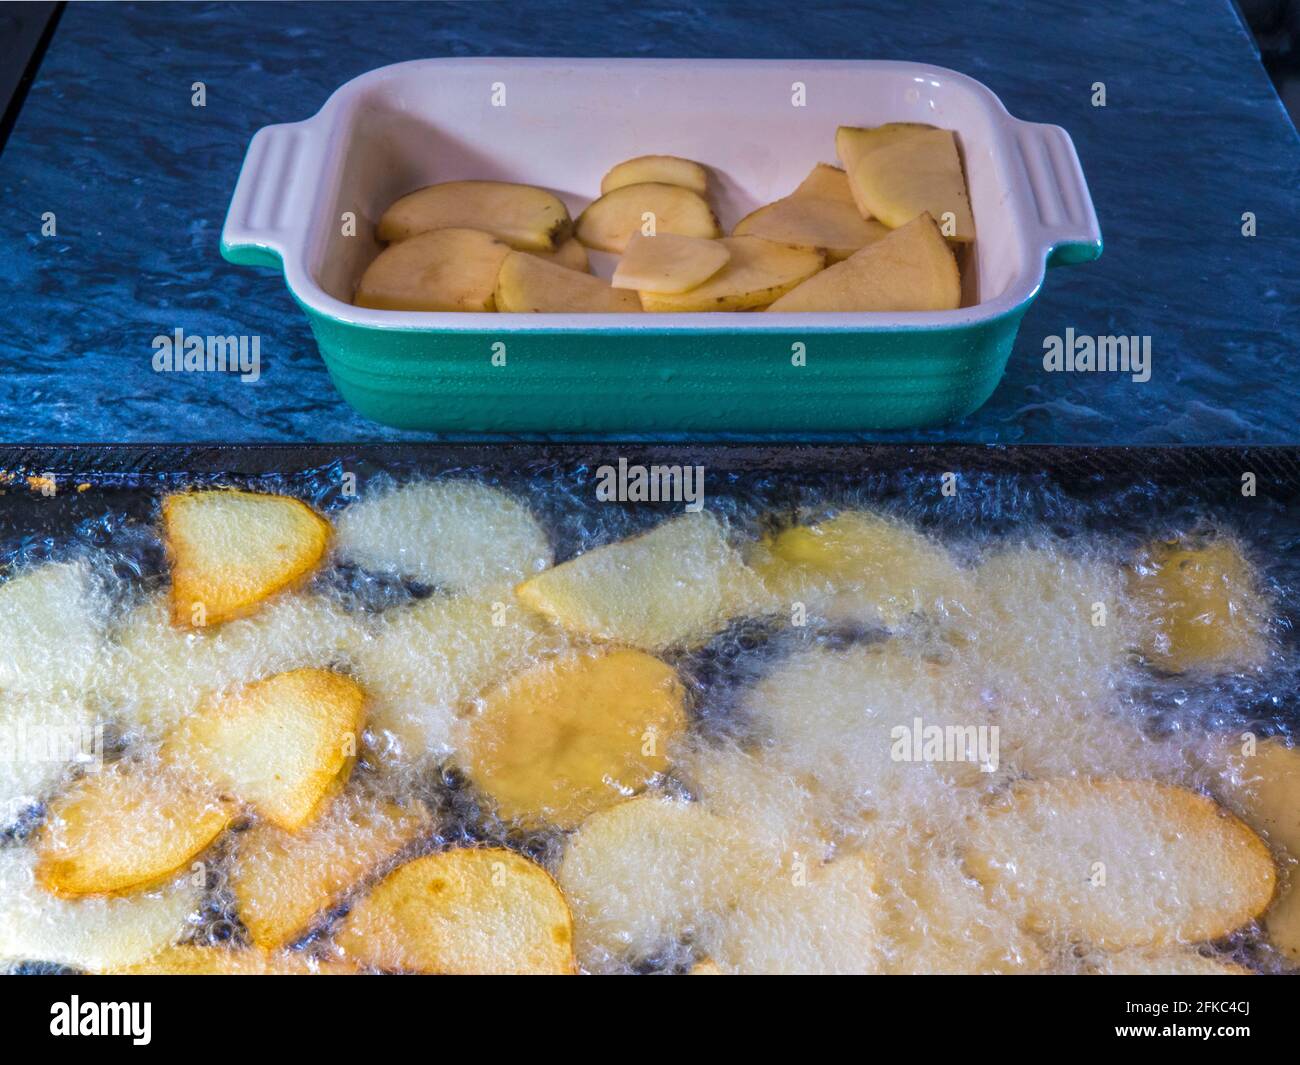 Closeup POV shot of thinly sliced pieces of raw potato in a dish, ready to cook, with some already frying in a flat pan of bubbling hot oil. Stock Photo